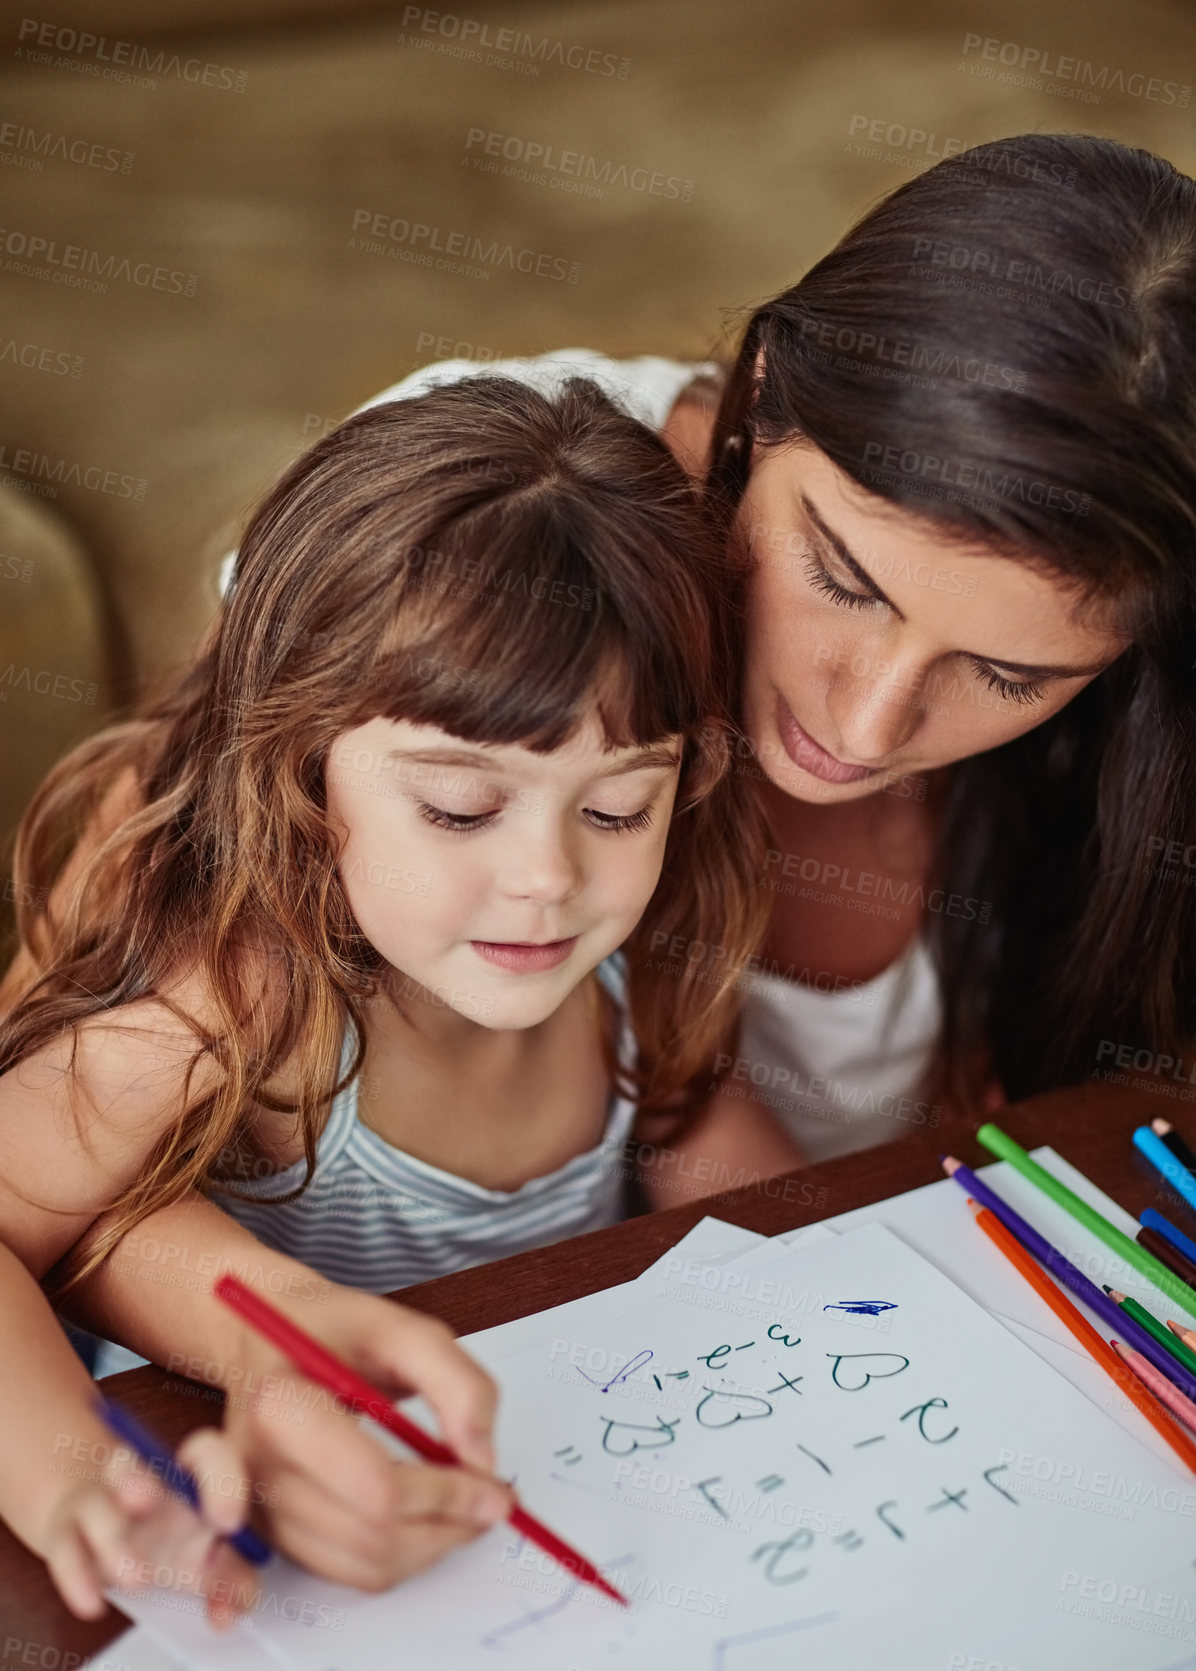 Buy stock photo Shot of a young woman drawing together with her young daughter at home